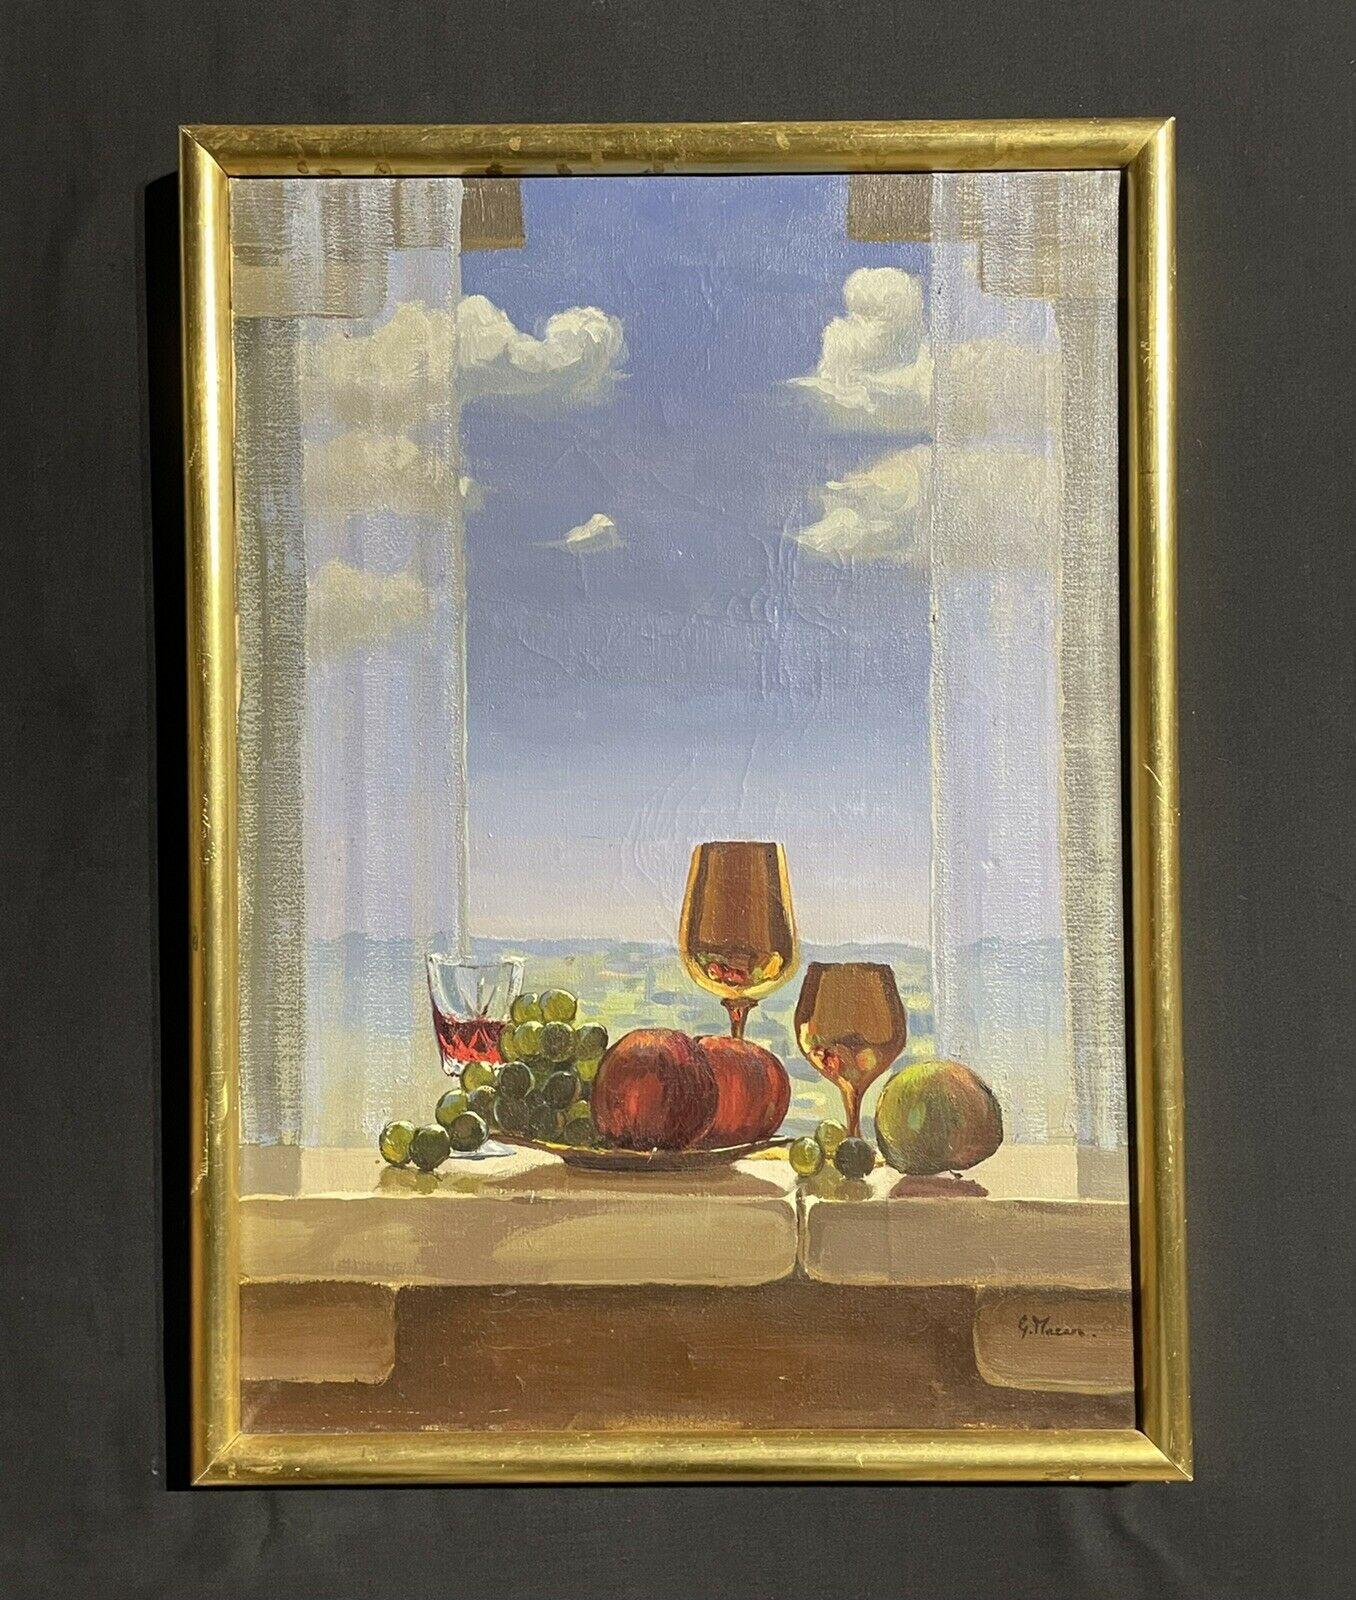 FRENCH SURREALIST SIGNED OIL PAINTING - STILL LIFE BY WINDOW SILL - Surrealist Painting by Unknown